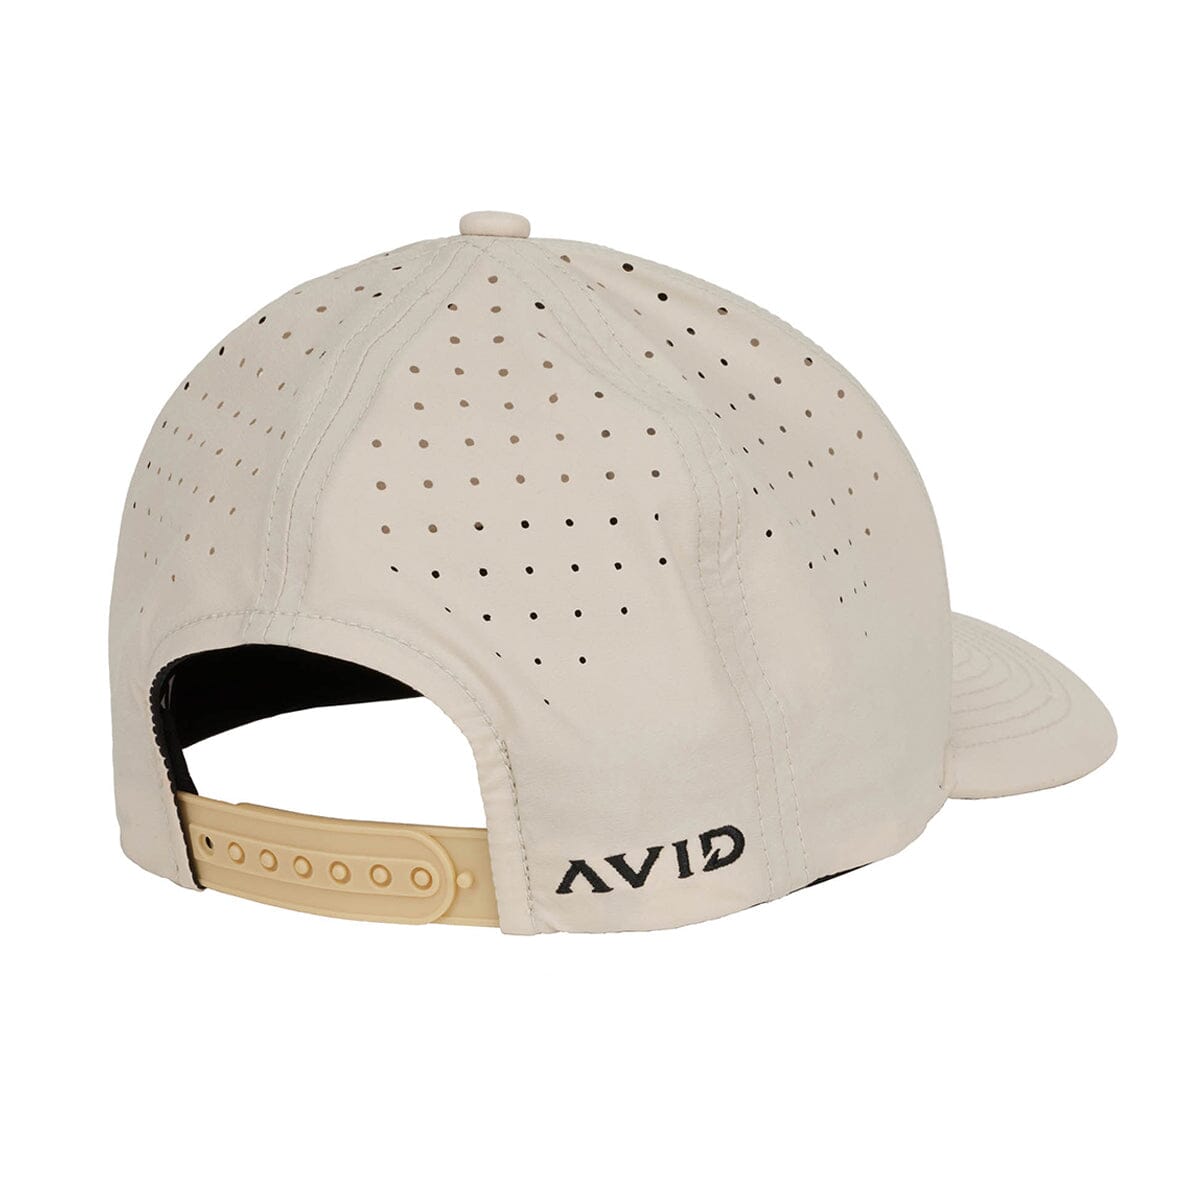 Avid Ace Iconic Performance Hat Midnight-Blue Os